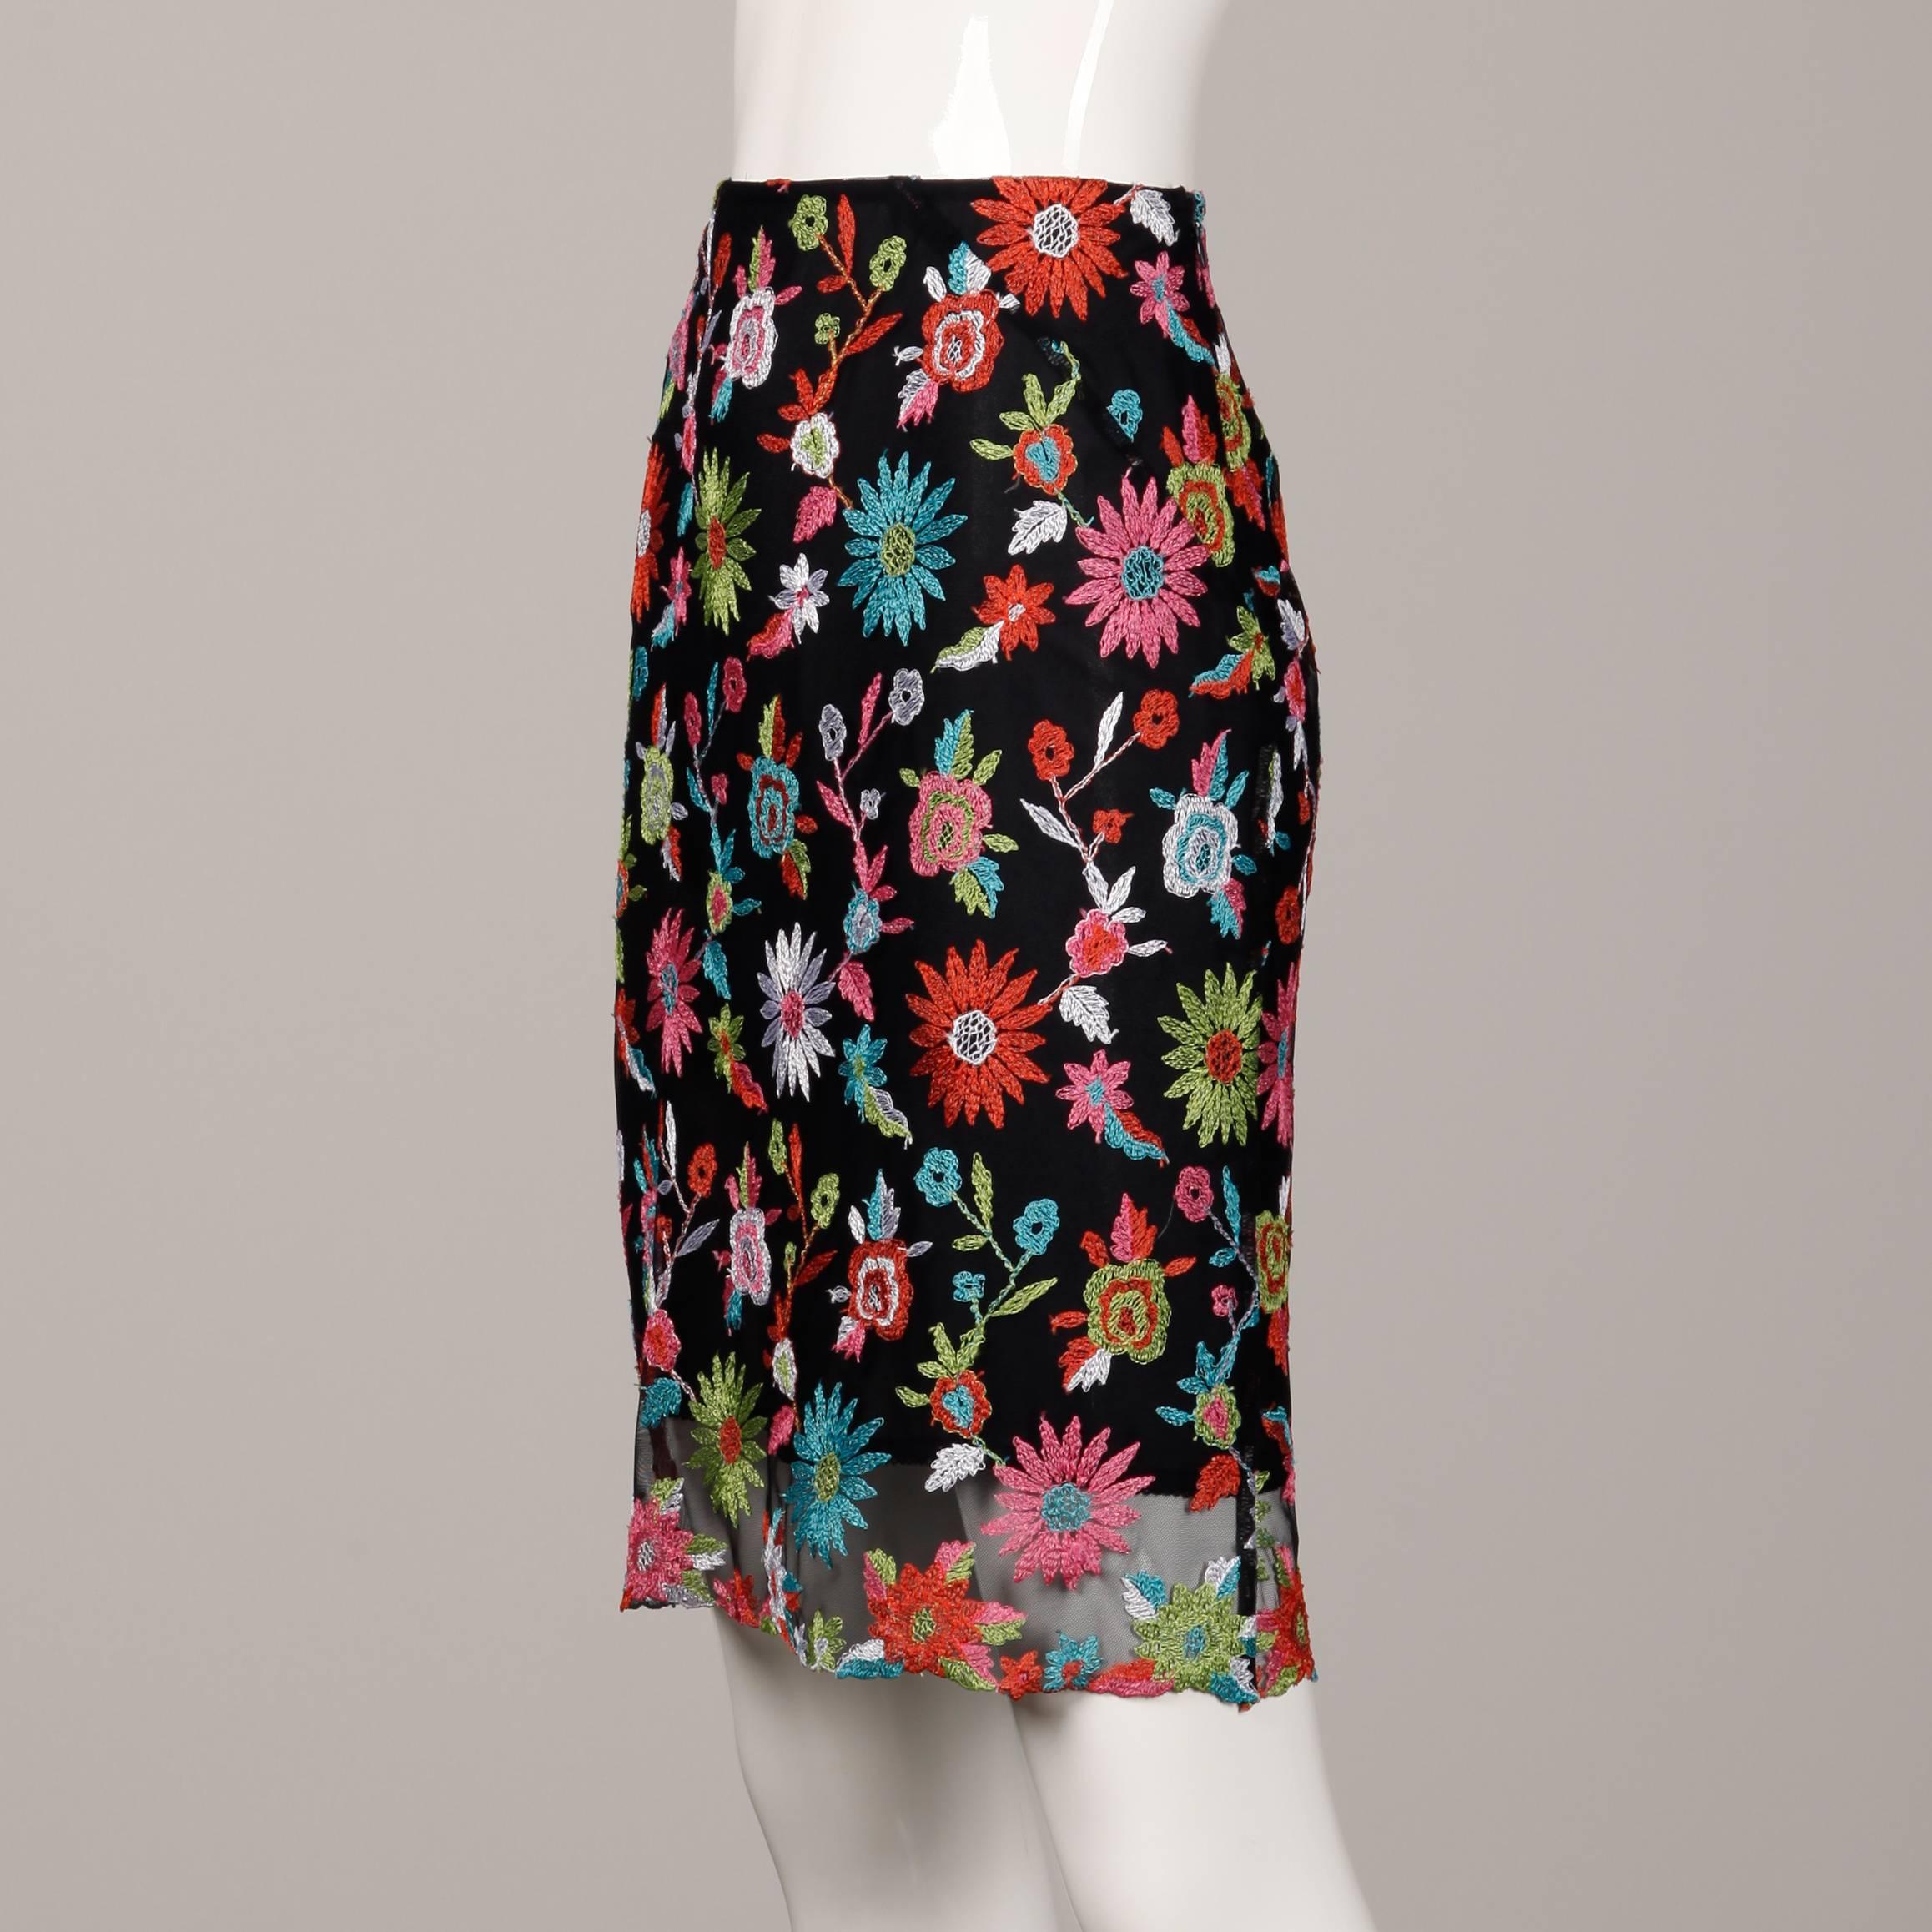 Vintage 1990s mesh skirt with overall floral embroidery by Christian Lacroix. Fully lined with size zip closure. 100% polyester. The marked size is 36 and the skirt fits like a size small.  The waist measures 25", hips 35" and total length